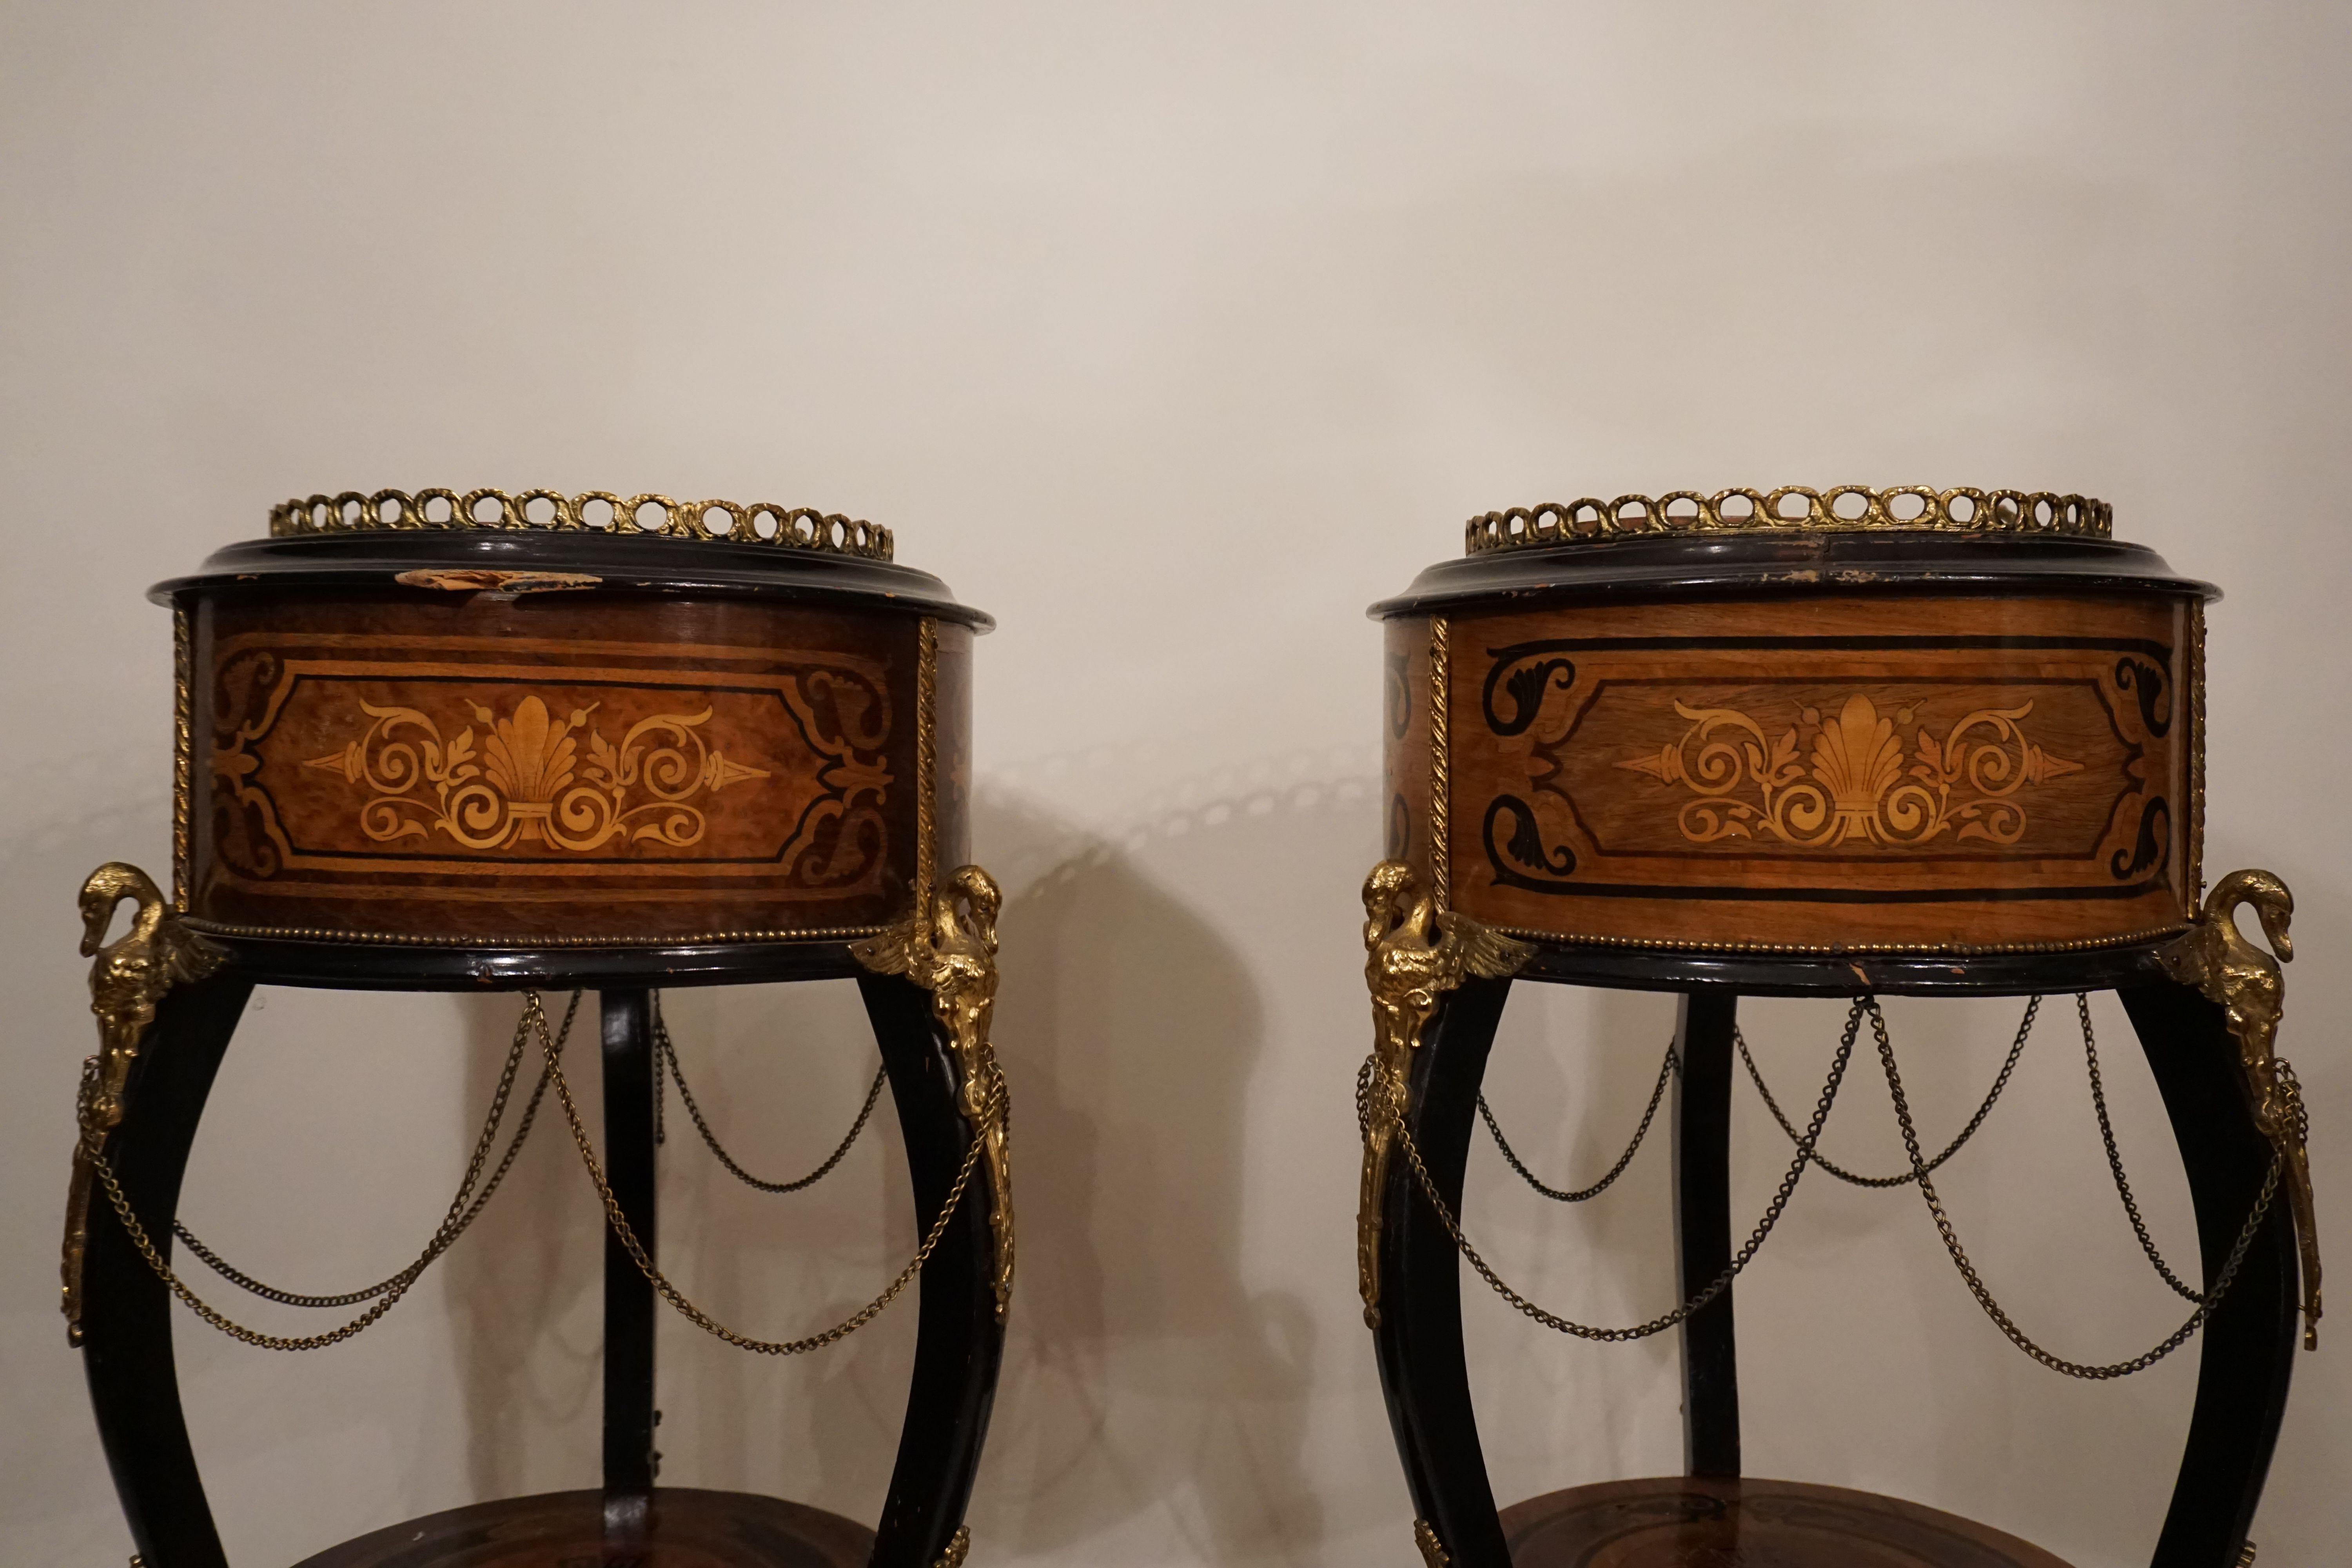 Pair of champagne bucket mini-bar when suitable as columns original Louis XVI, circa 1800
High quality workmanship
With normal signs of use.